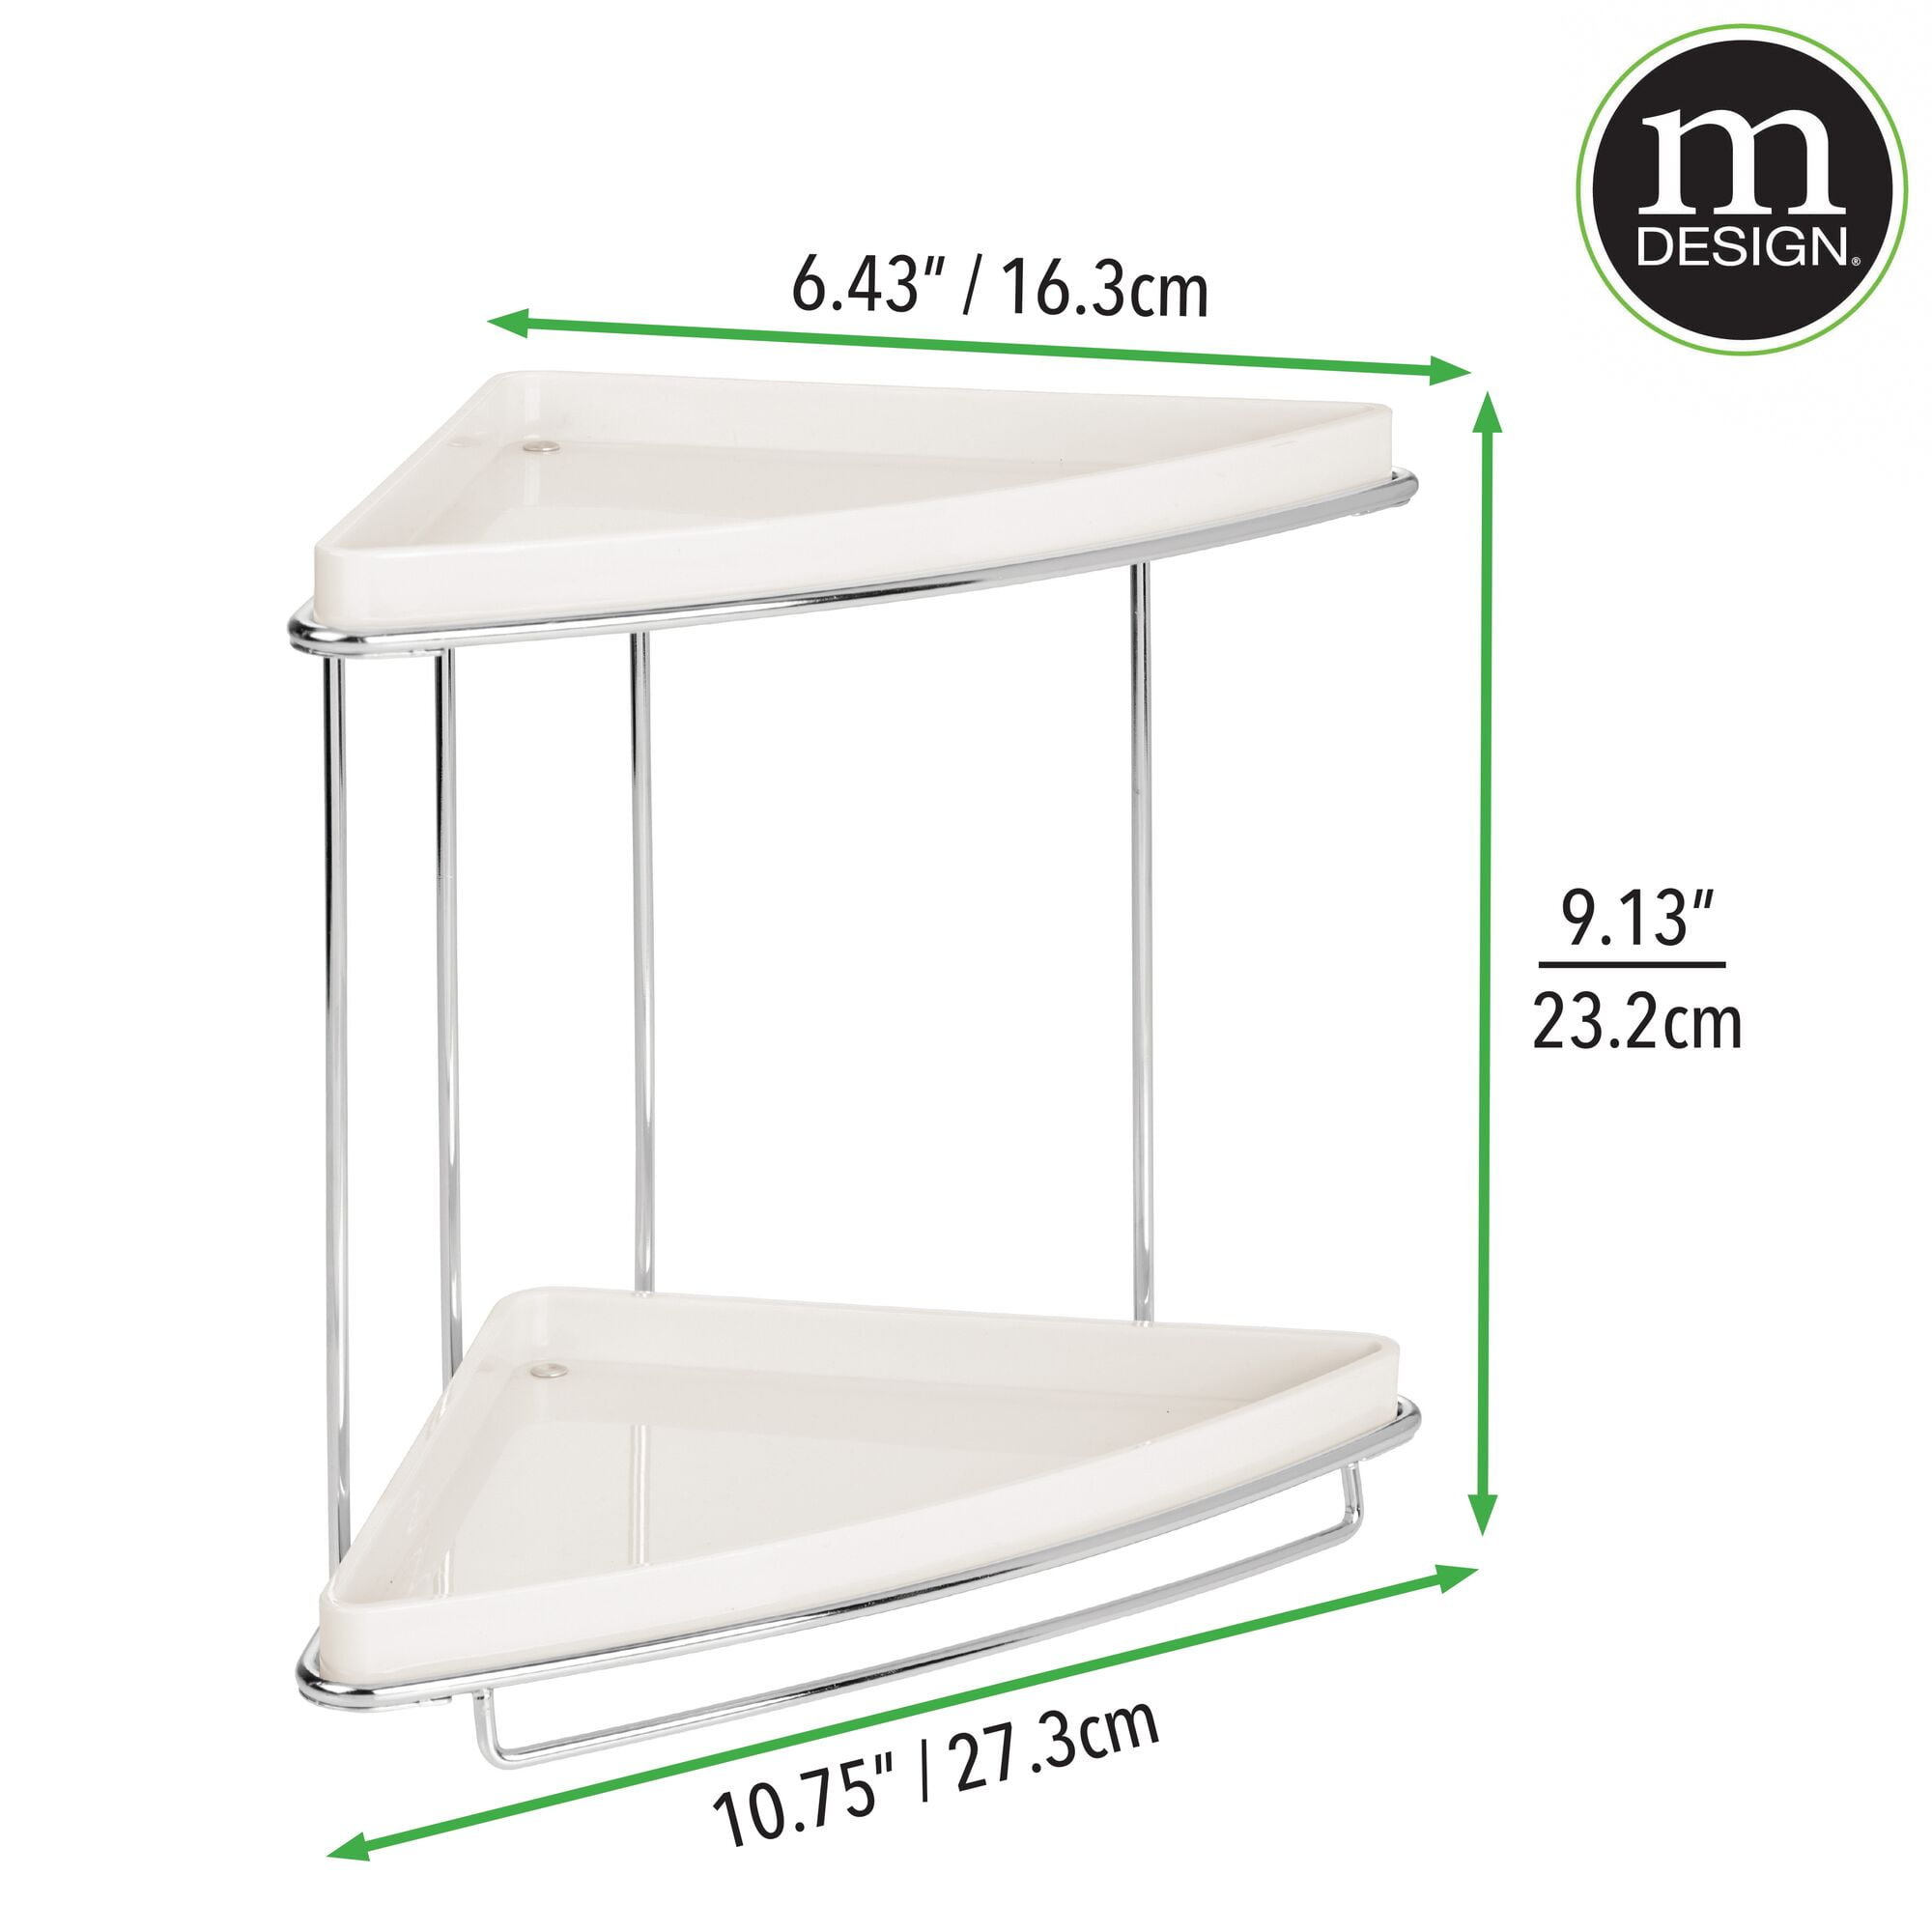  mDesign Plastic Wall Mount, 2 Tier Storage Organizer Shelf for  Bathroom, Kitchen; Holds Vitamins, Supplements, Aspirin, Medicine Bottles,  Nail Polish, Cosmetics and More, Ligne Collection - Clear : Home & Kitchen